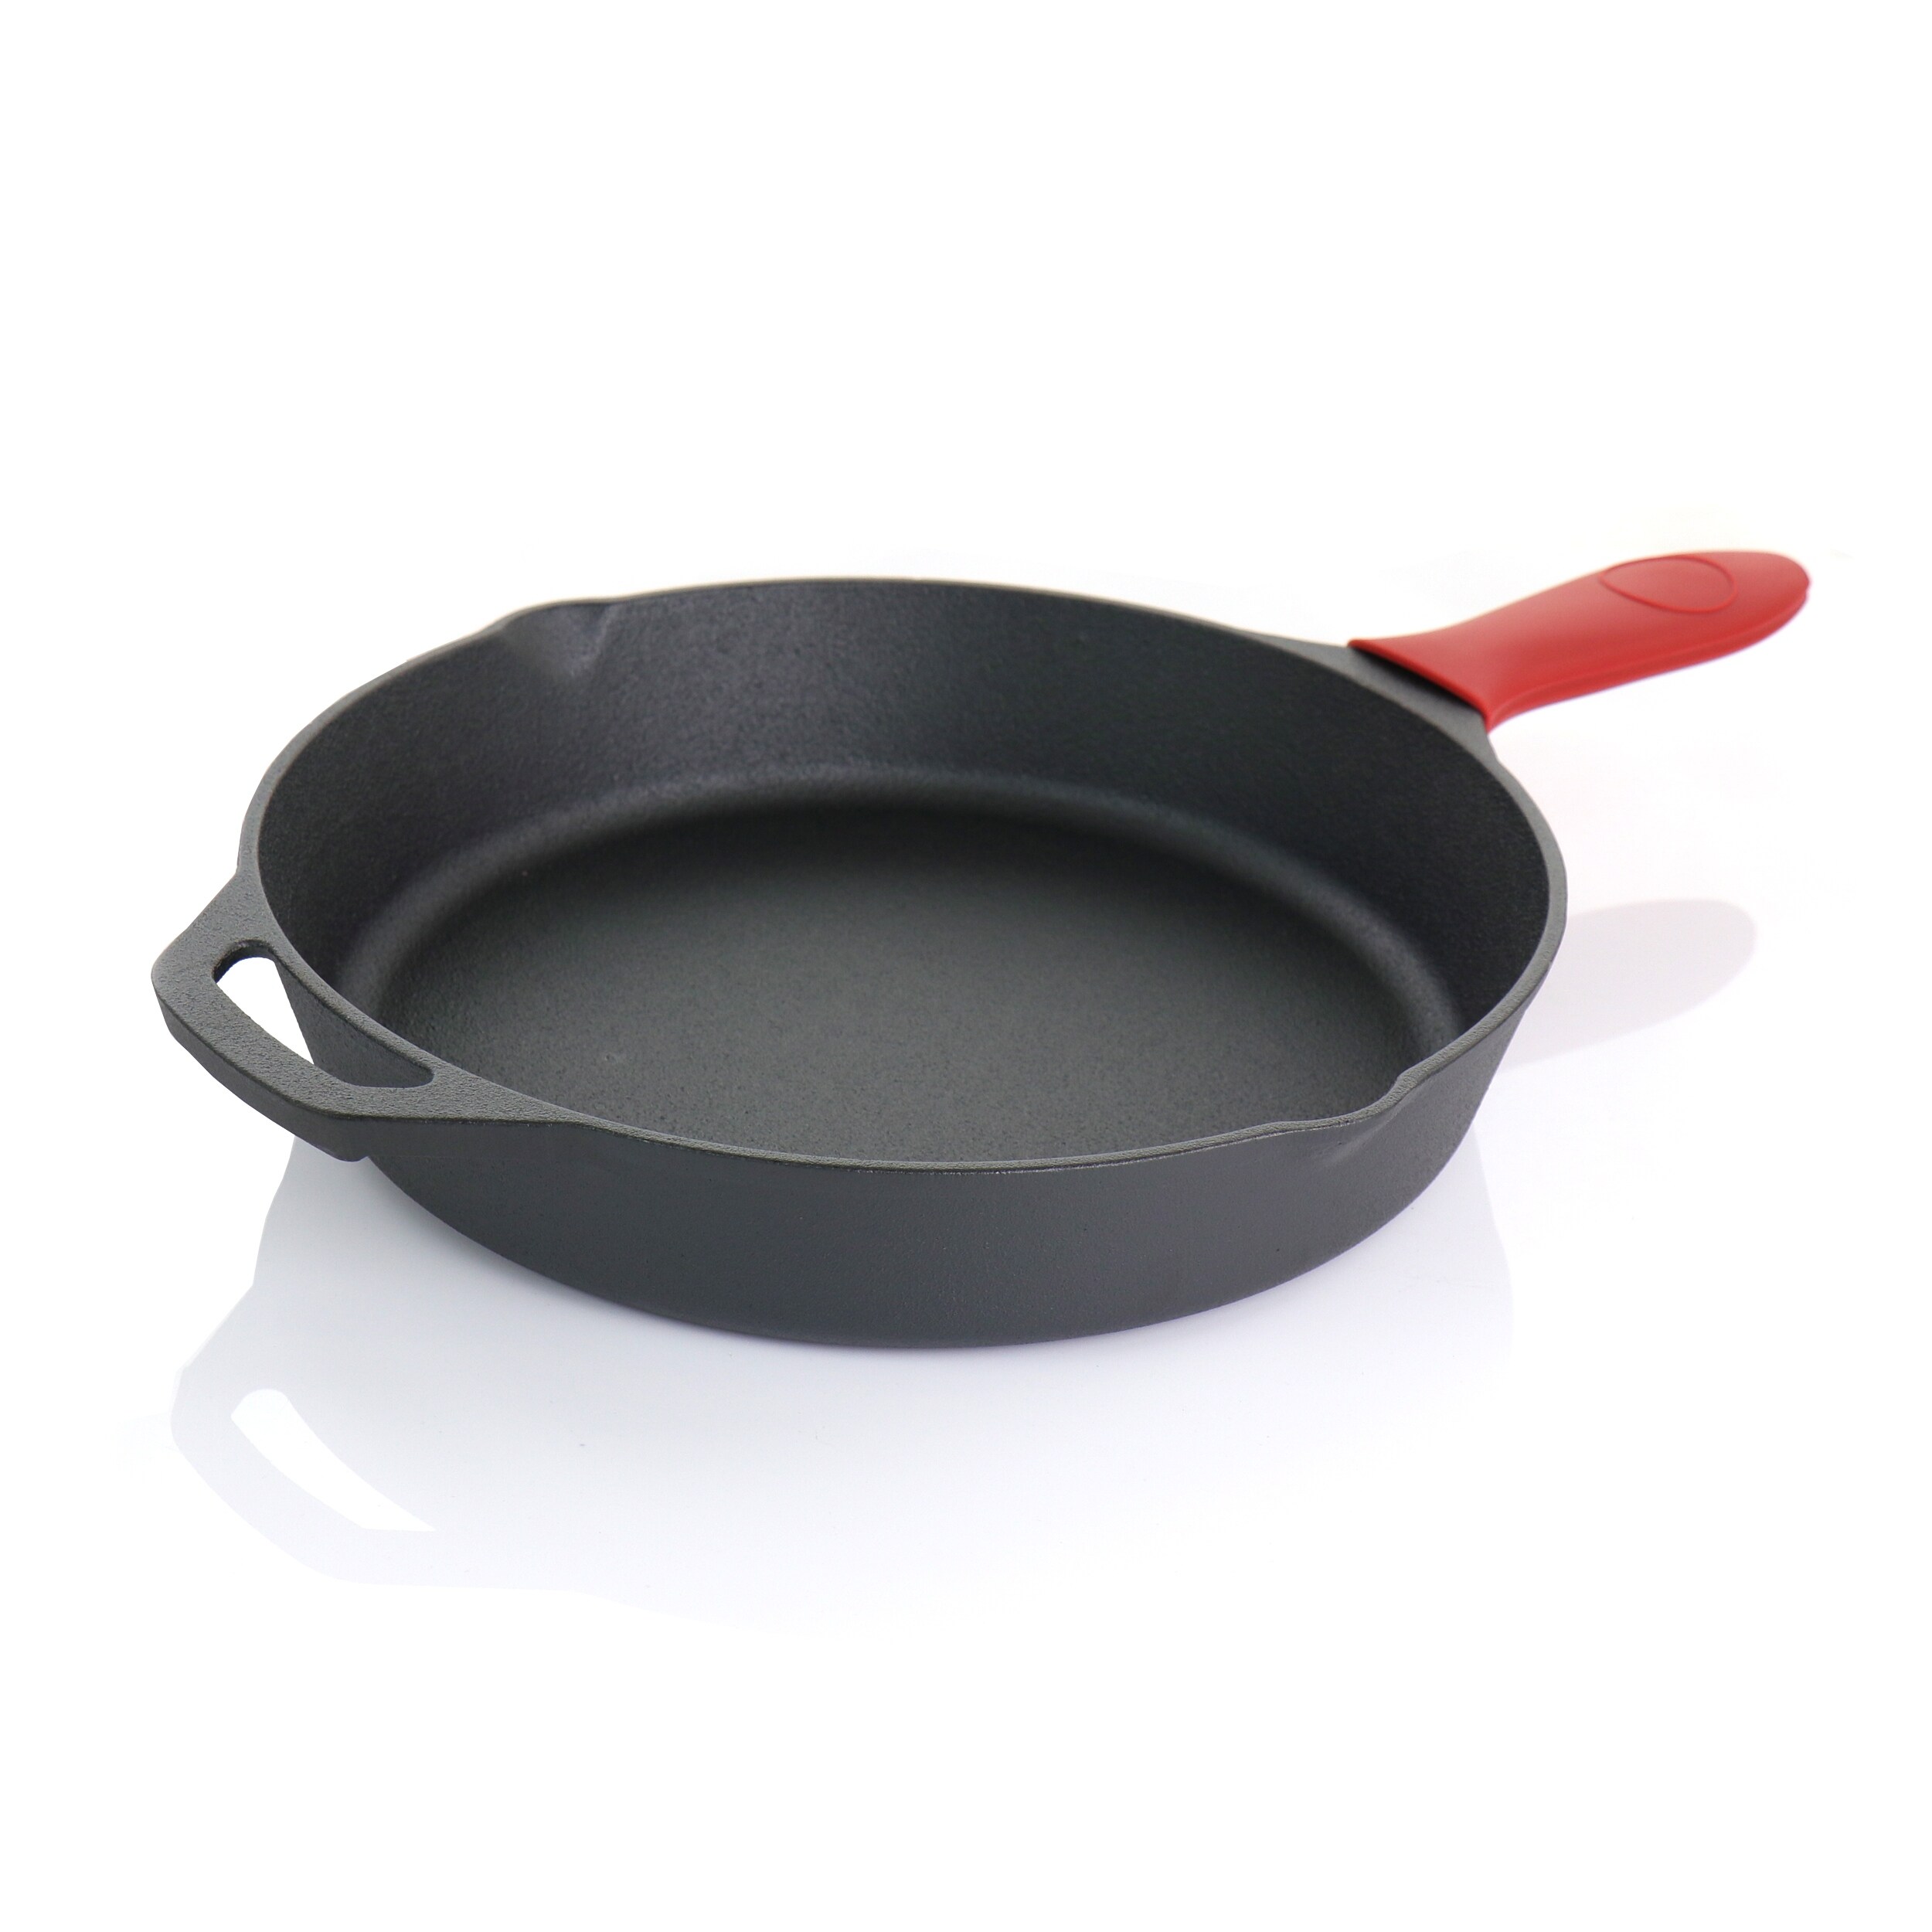 https://ak1.ostkcdn.com/images/products/is/images/direct/f3c00079456cba2a43d65eaad2fbf7b372c27c87/MegaChef-Pre-Seasoned-6Pc-Cast-Iron-Skillet-Set-w-Lids-and-Red-Holders.jpg